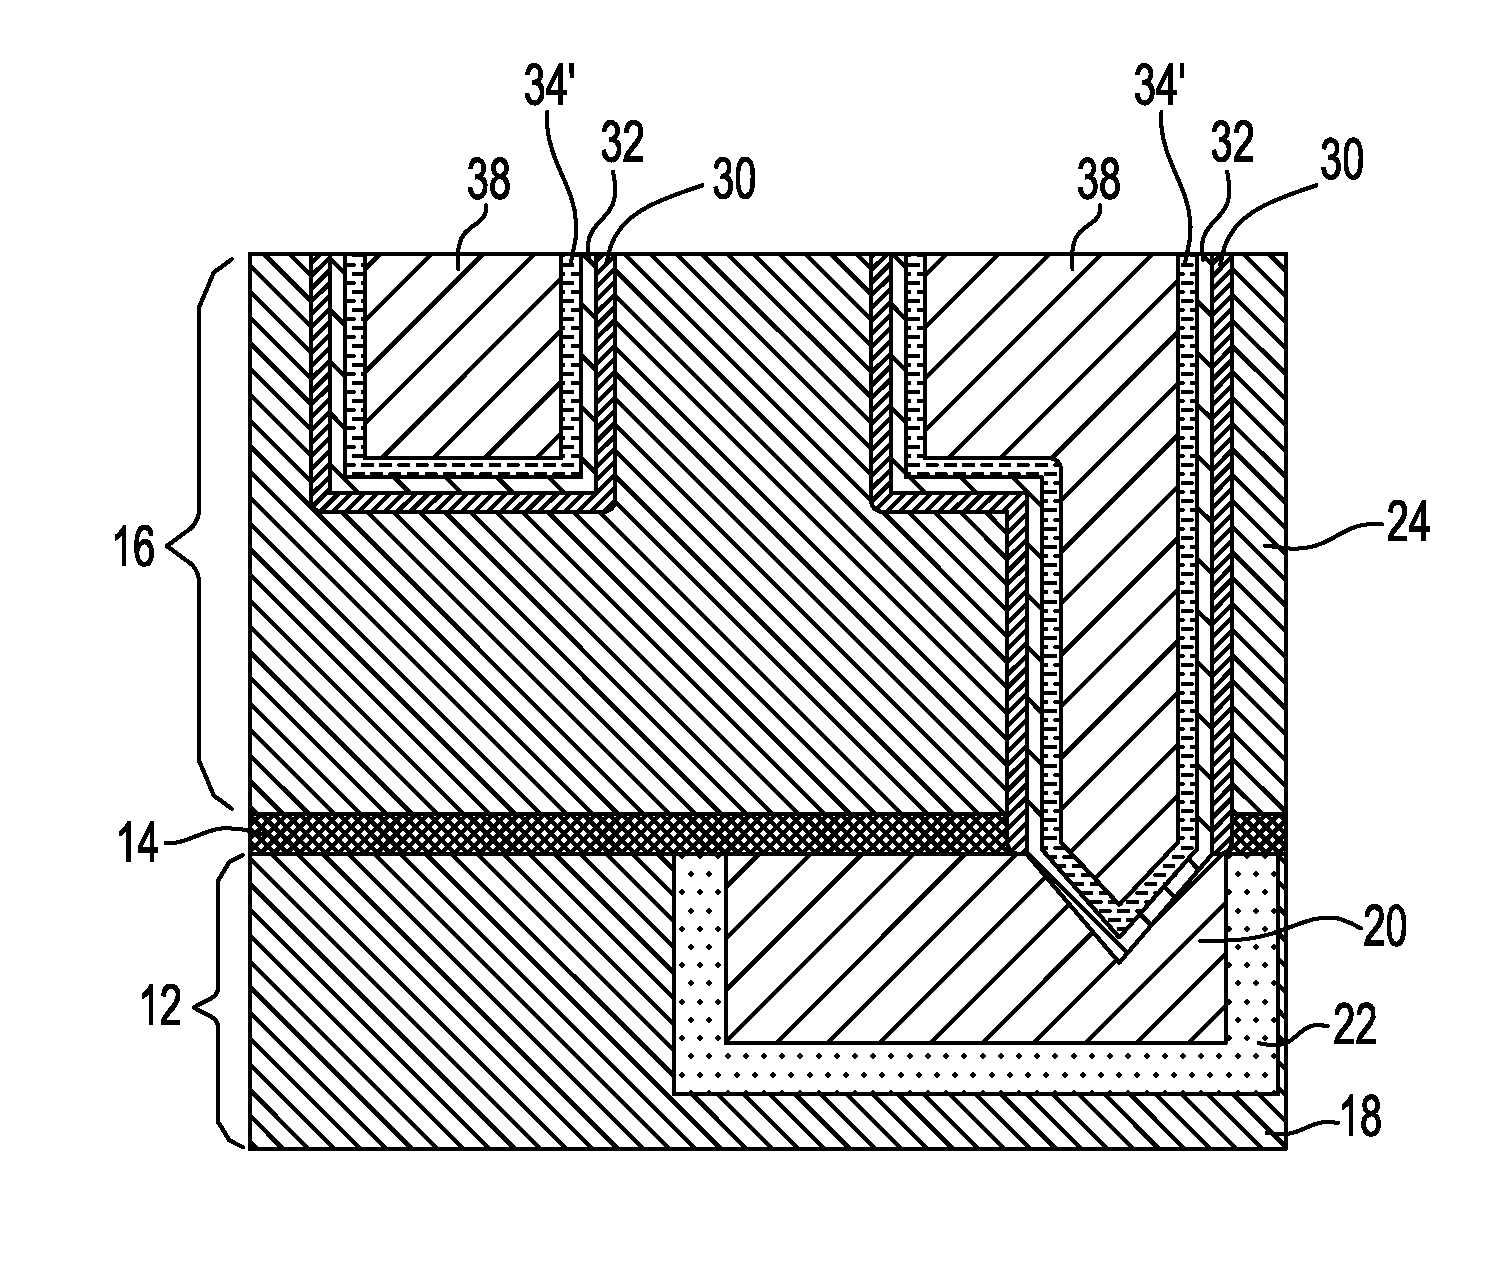 Large grain size conductive structure for narrow interconnect openings